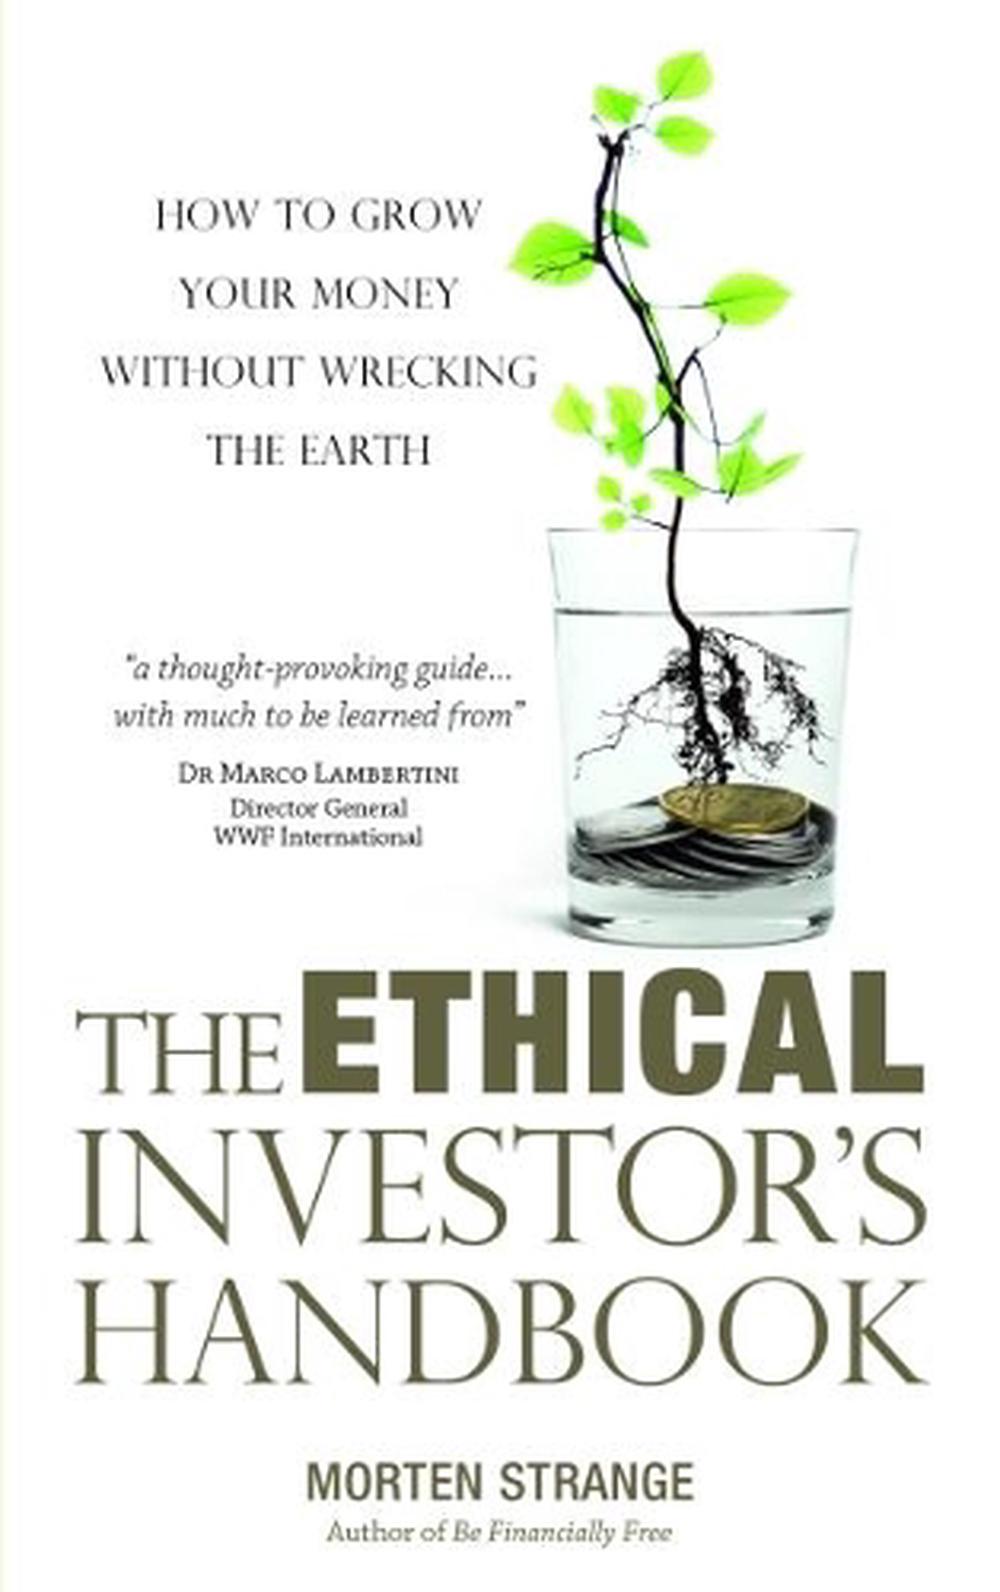 Ethical Investor's Handbook: How to Grow Your Money Without Wrecking ...